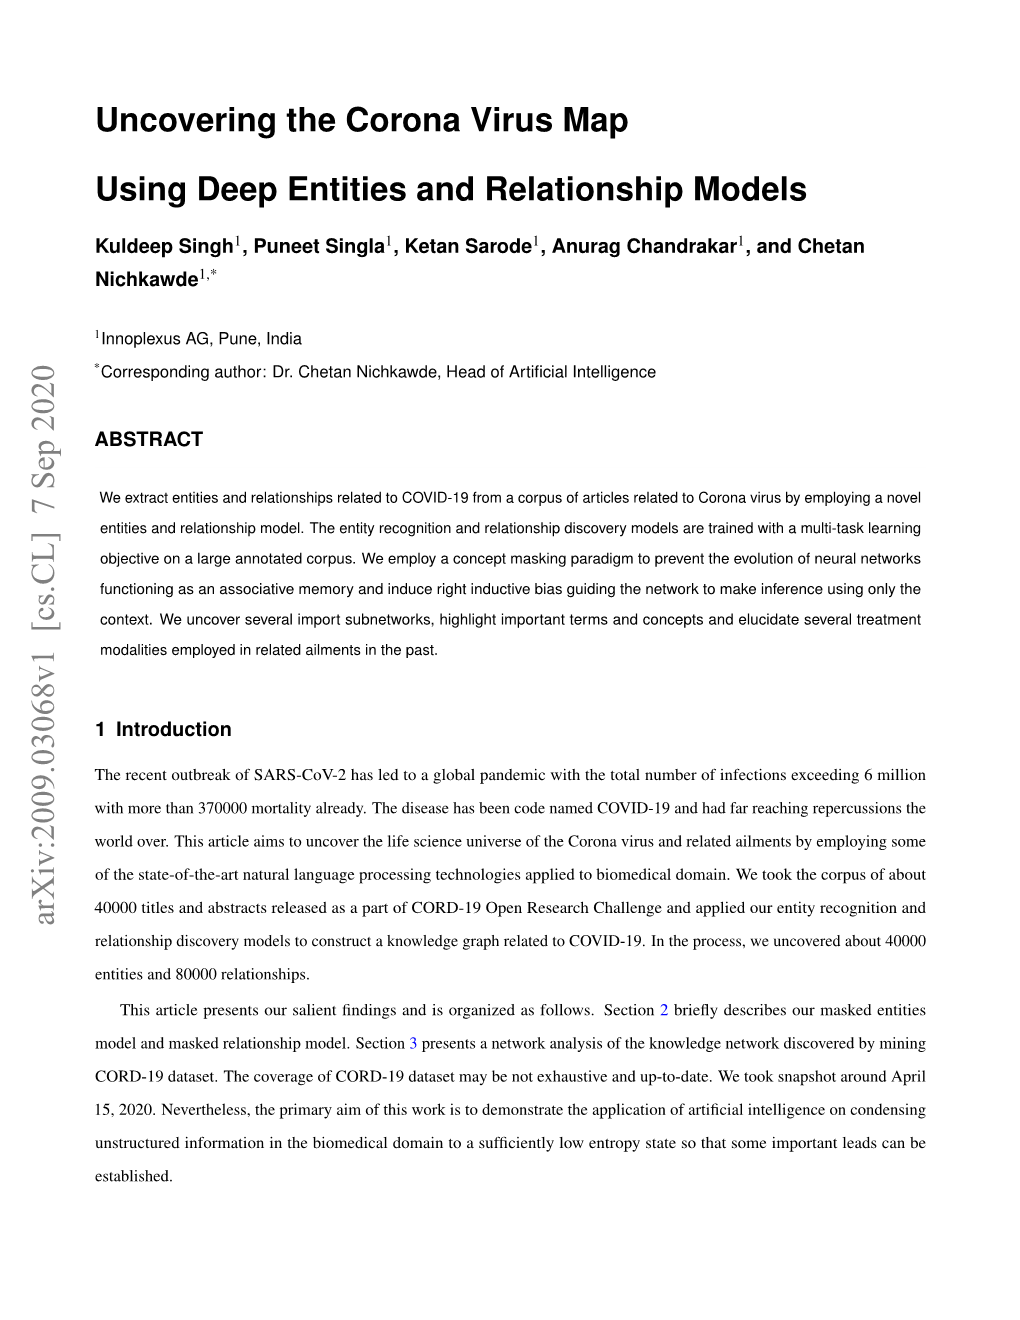 Arxiv:2009.03068V1 [Cs.CL] 7 Sep 2020 Relationship Discovery Models to Construct a Knowledge Graph Related to COVID-19